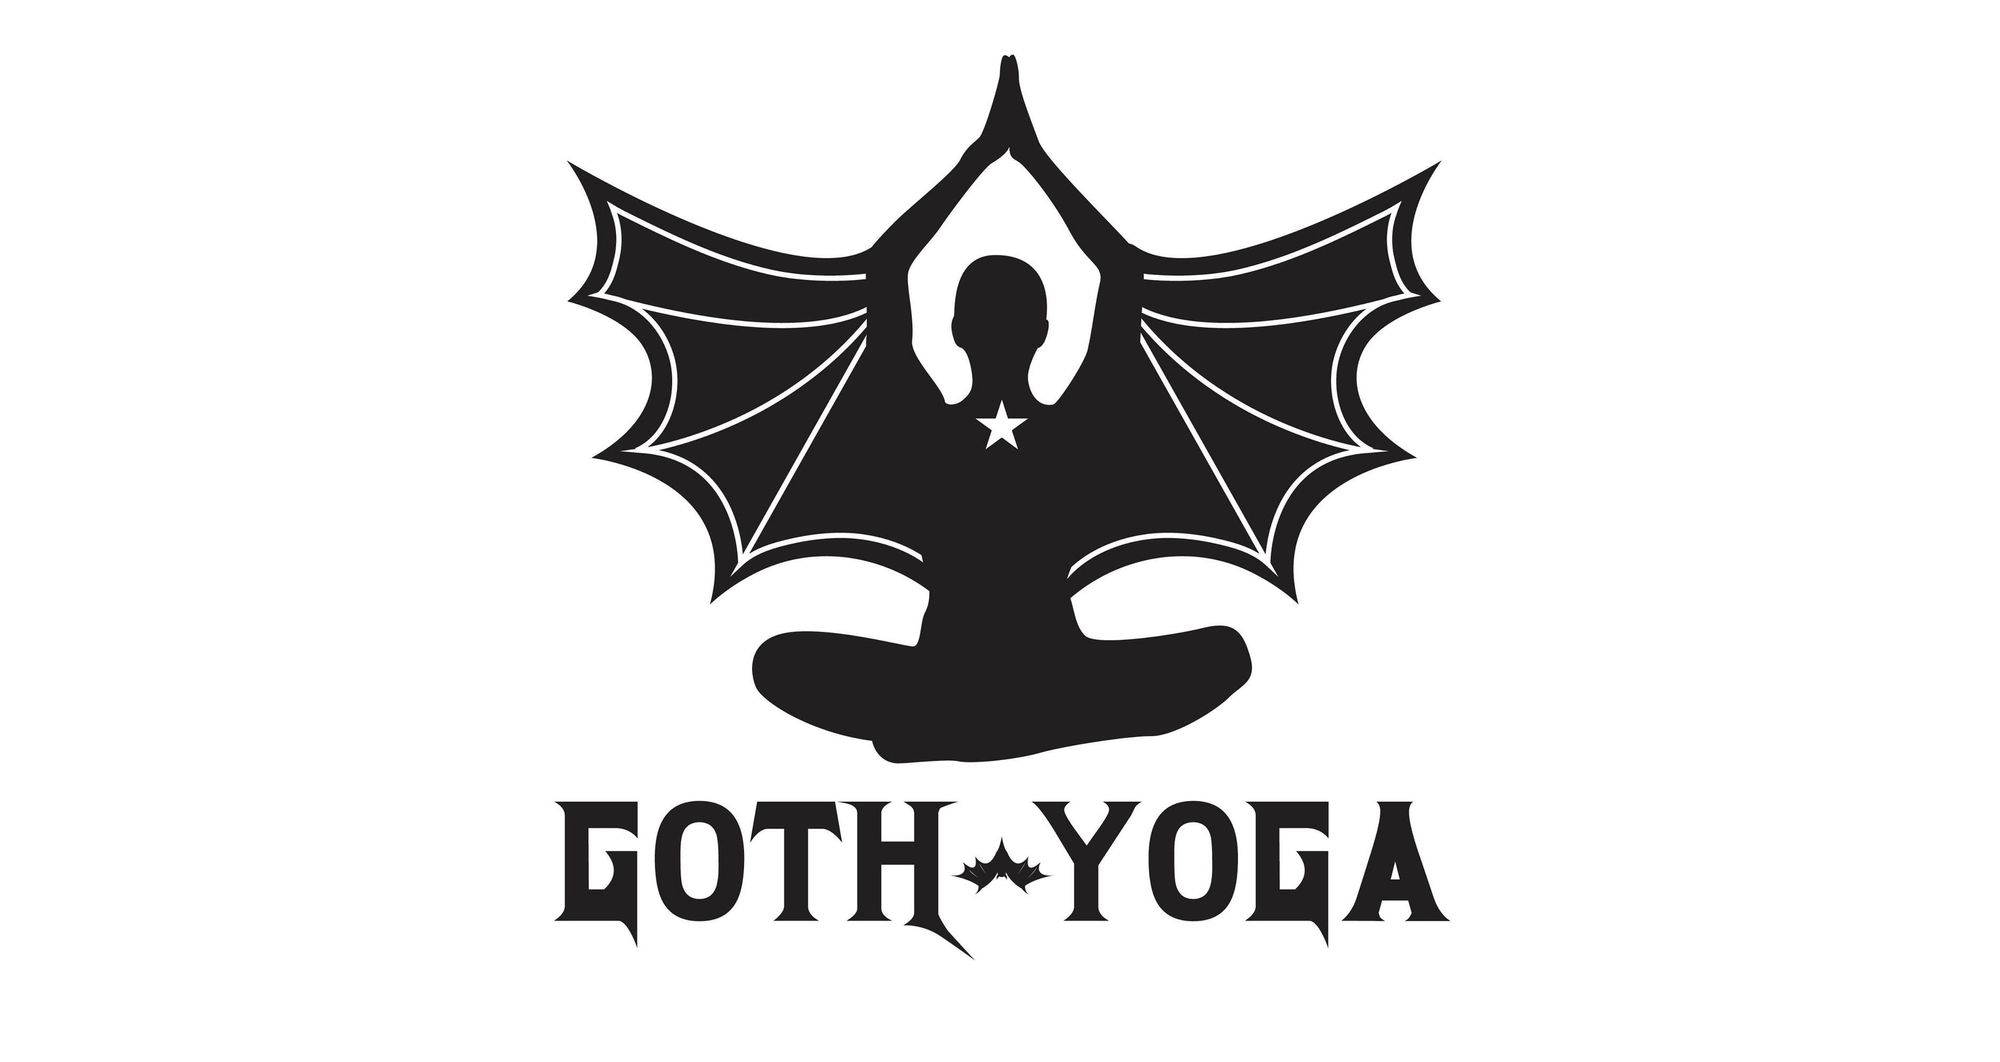 Spooky and Zen Elements - Goth Yoga